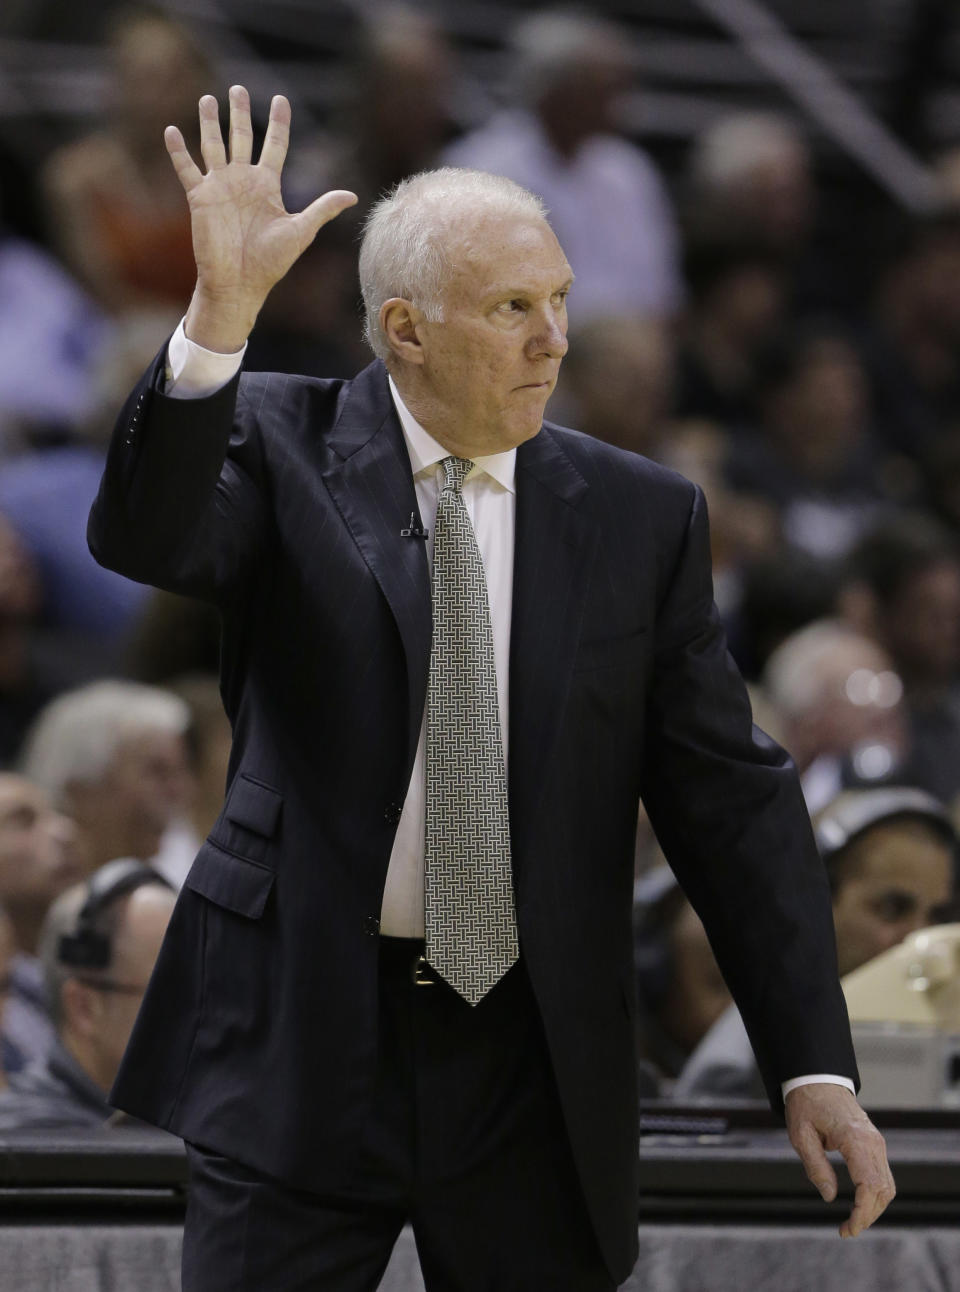 San Antonio Spurs coach Gregg Popovich signals to his players during the first half of Game 2 of the opening-round NBA basketball playoff series against the Dallas Mavericks, Wednesday, April 23, 2014, in San Antonio. (AP Photo/Eric Gay)